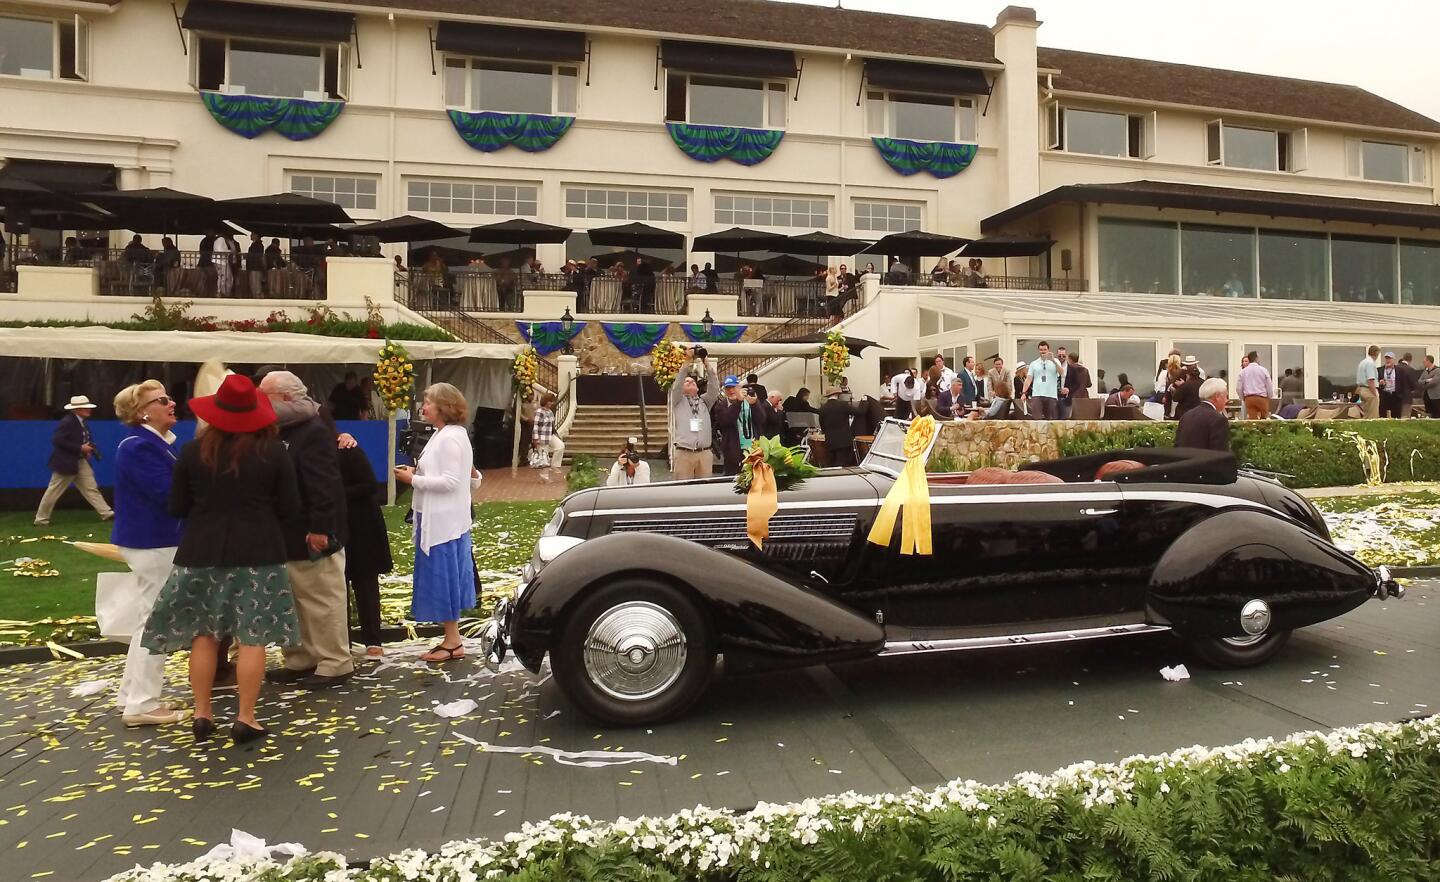 A 1936 Lancia Astura Cabriolet owned by Richard Mattei of Paradise Valley, Ariz., won best of show at the 2016 Pebble Beach Concours d'Elegance.